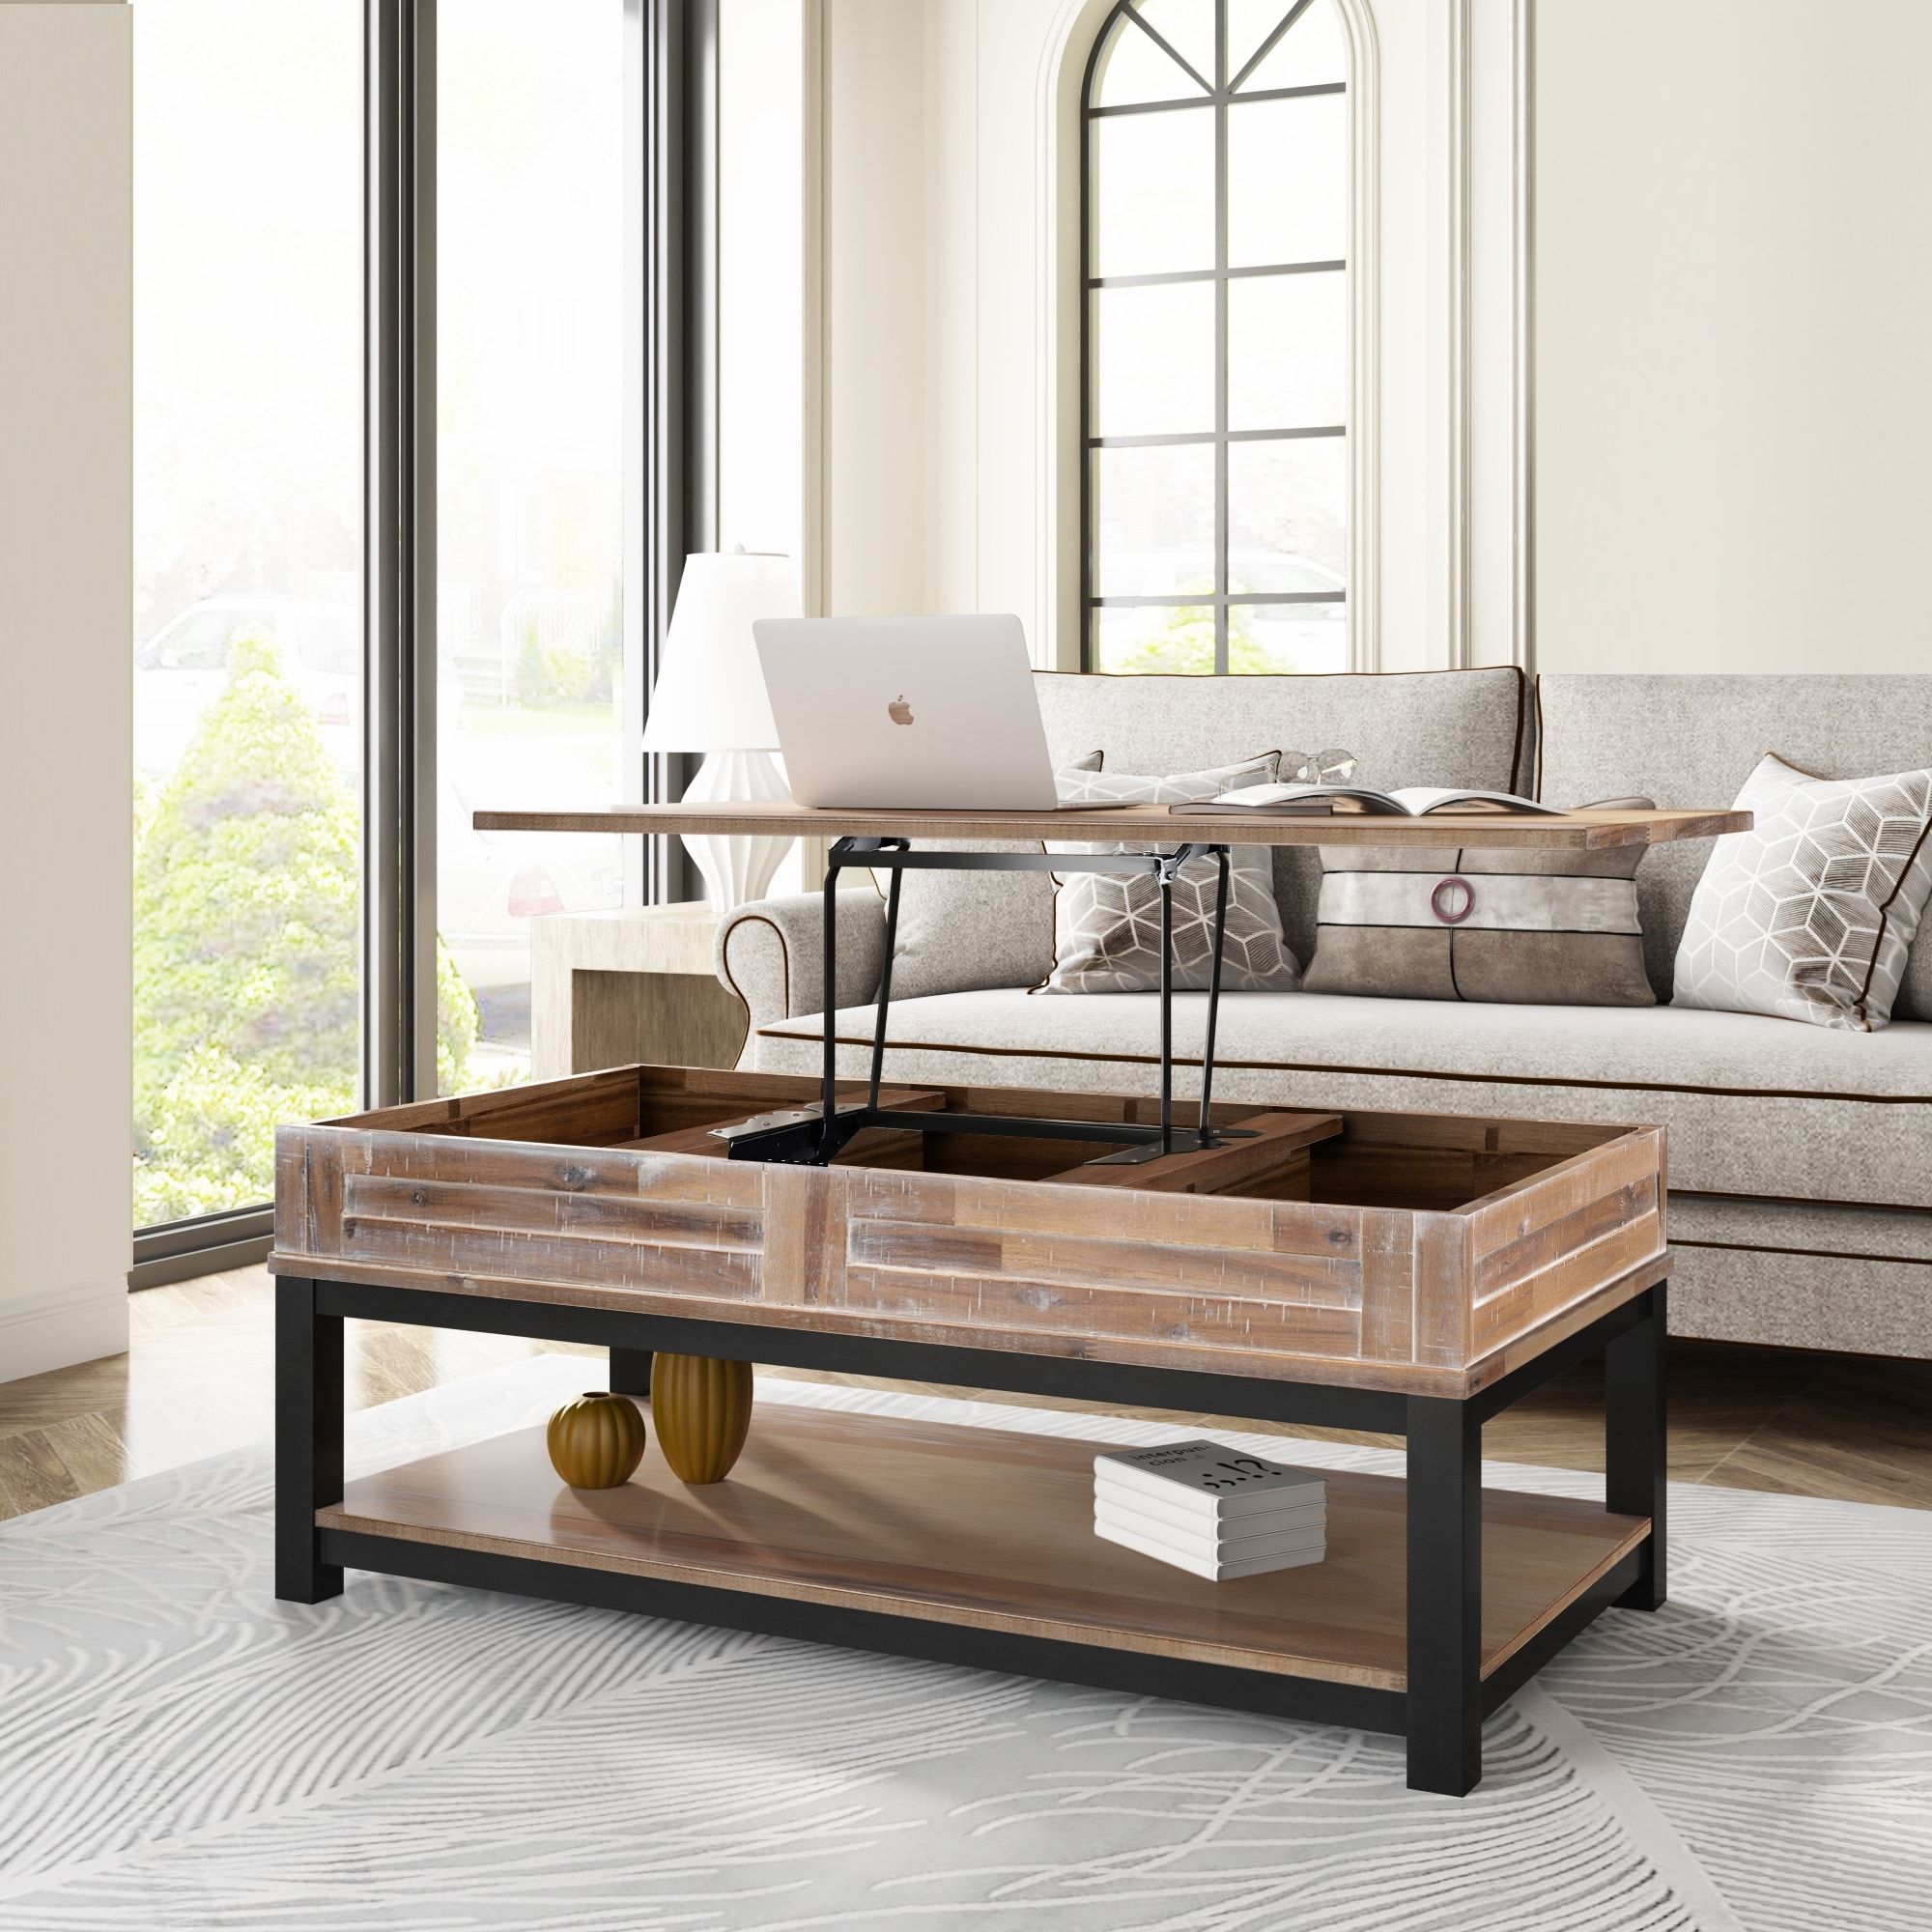 Wooden Lift Top Coffee Table With Inner Storage Space And Shelf – Bed Bath  & Beyond – 36909922 Throughout Lift Top Coffee Tables With Shelves (View 3 of 15)